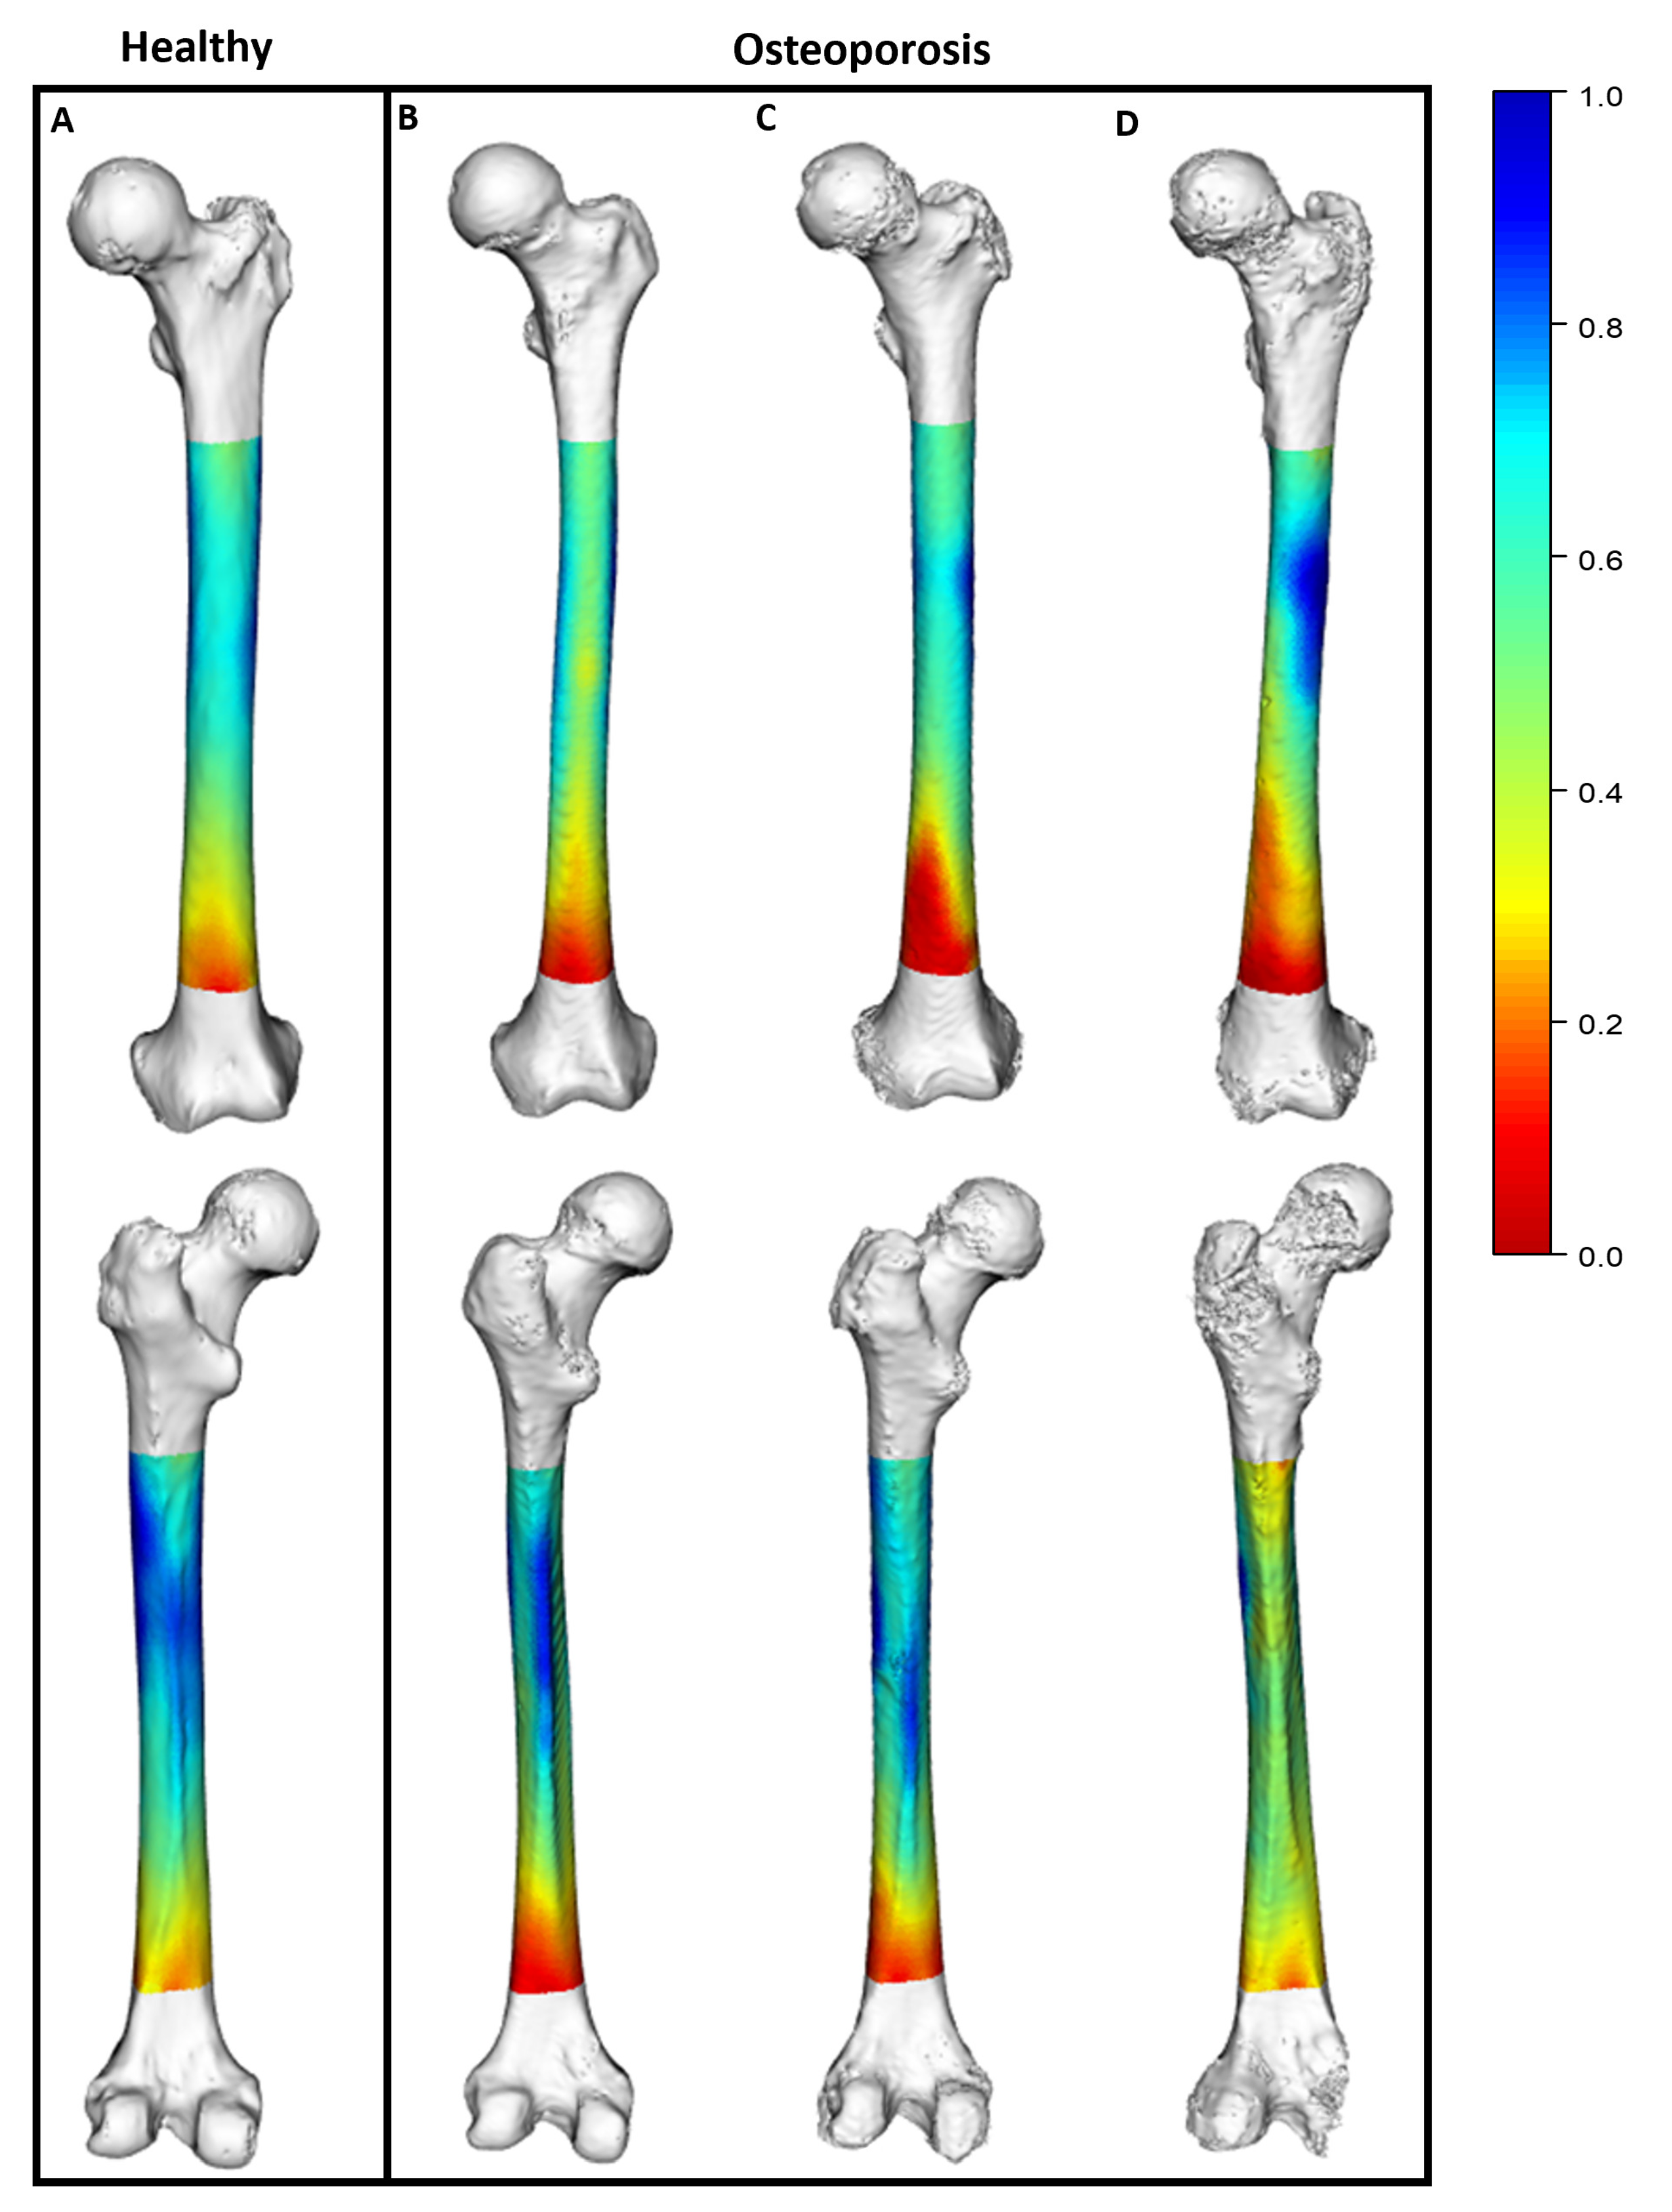 JPM | Free Full-Text | Advancing Osteoporosis Evaluation Procedures:  Detailed Computational Analysis of Regional Structural Vulnerabilities in  Osteoporotic Bone